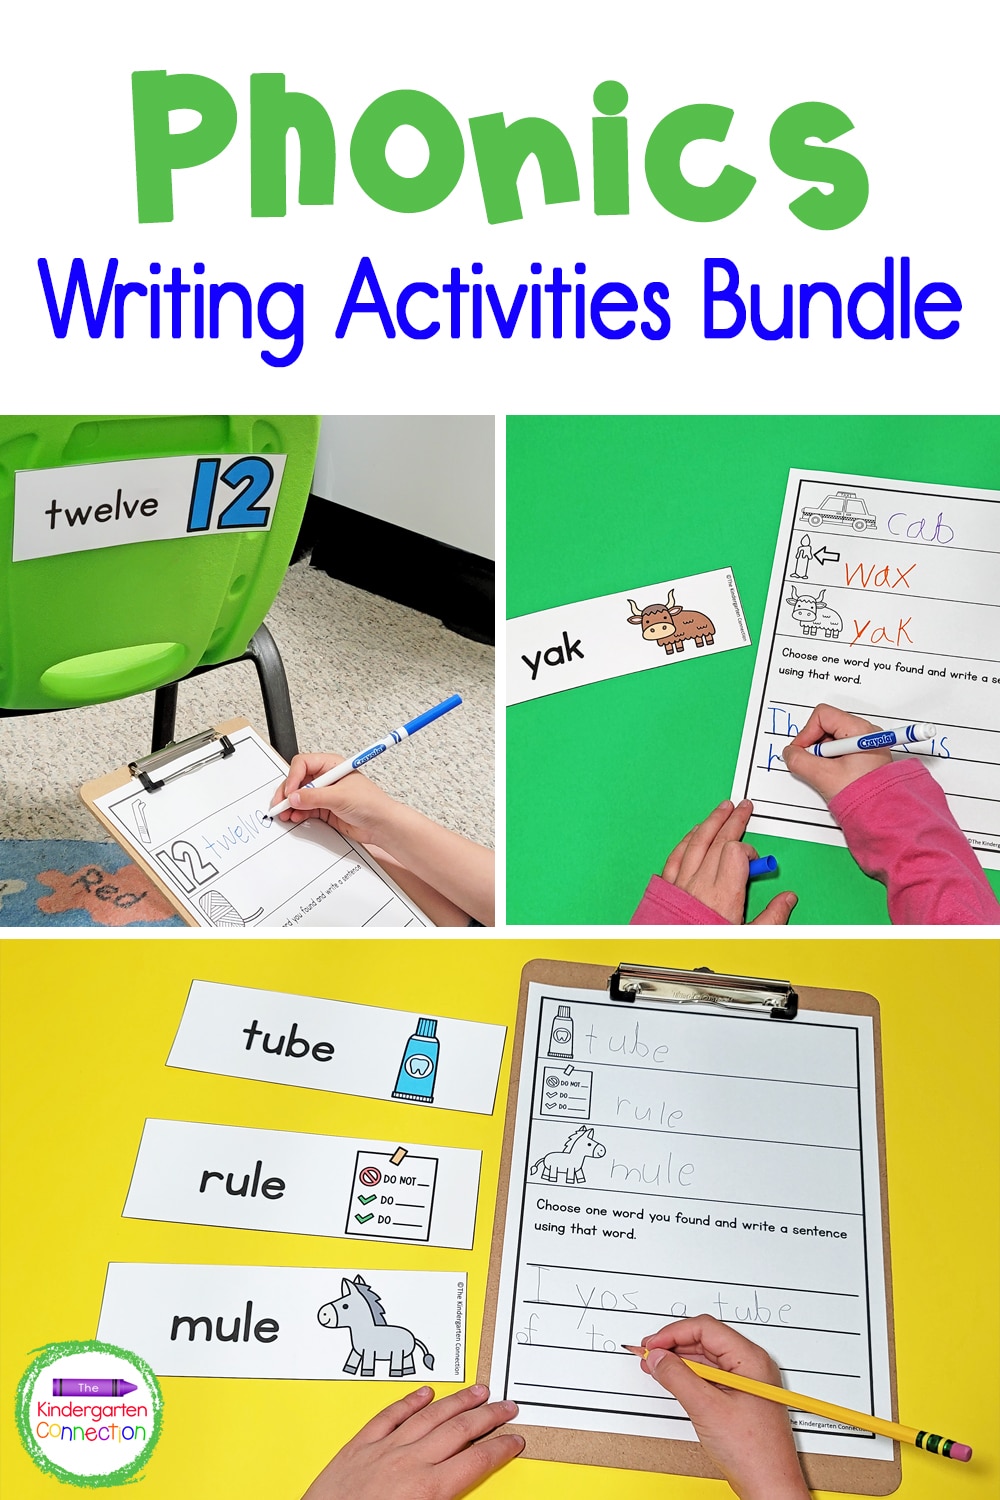 Designed with Kindergarten in mind, this Phonics Writing Activities Bundle is the perfect way to get kids moving and writing!